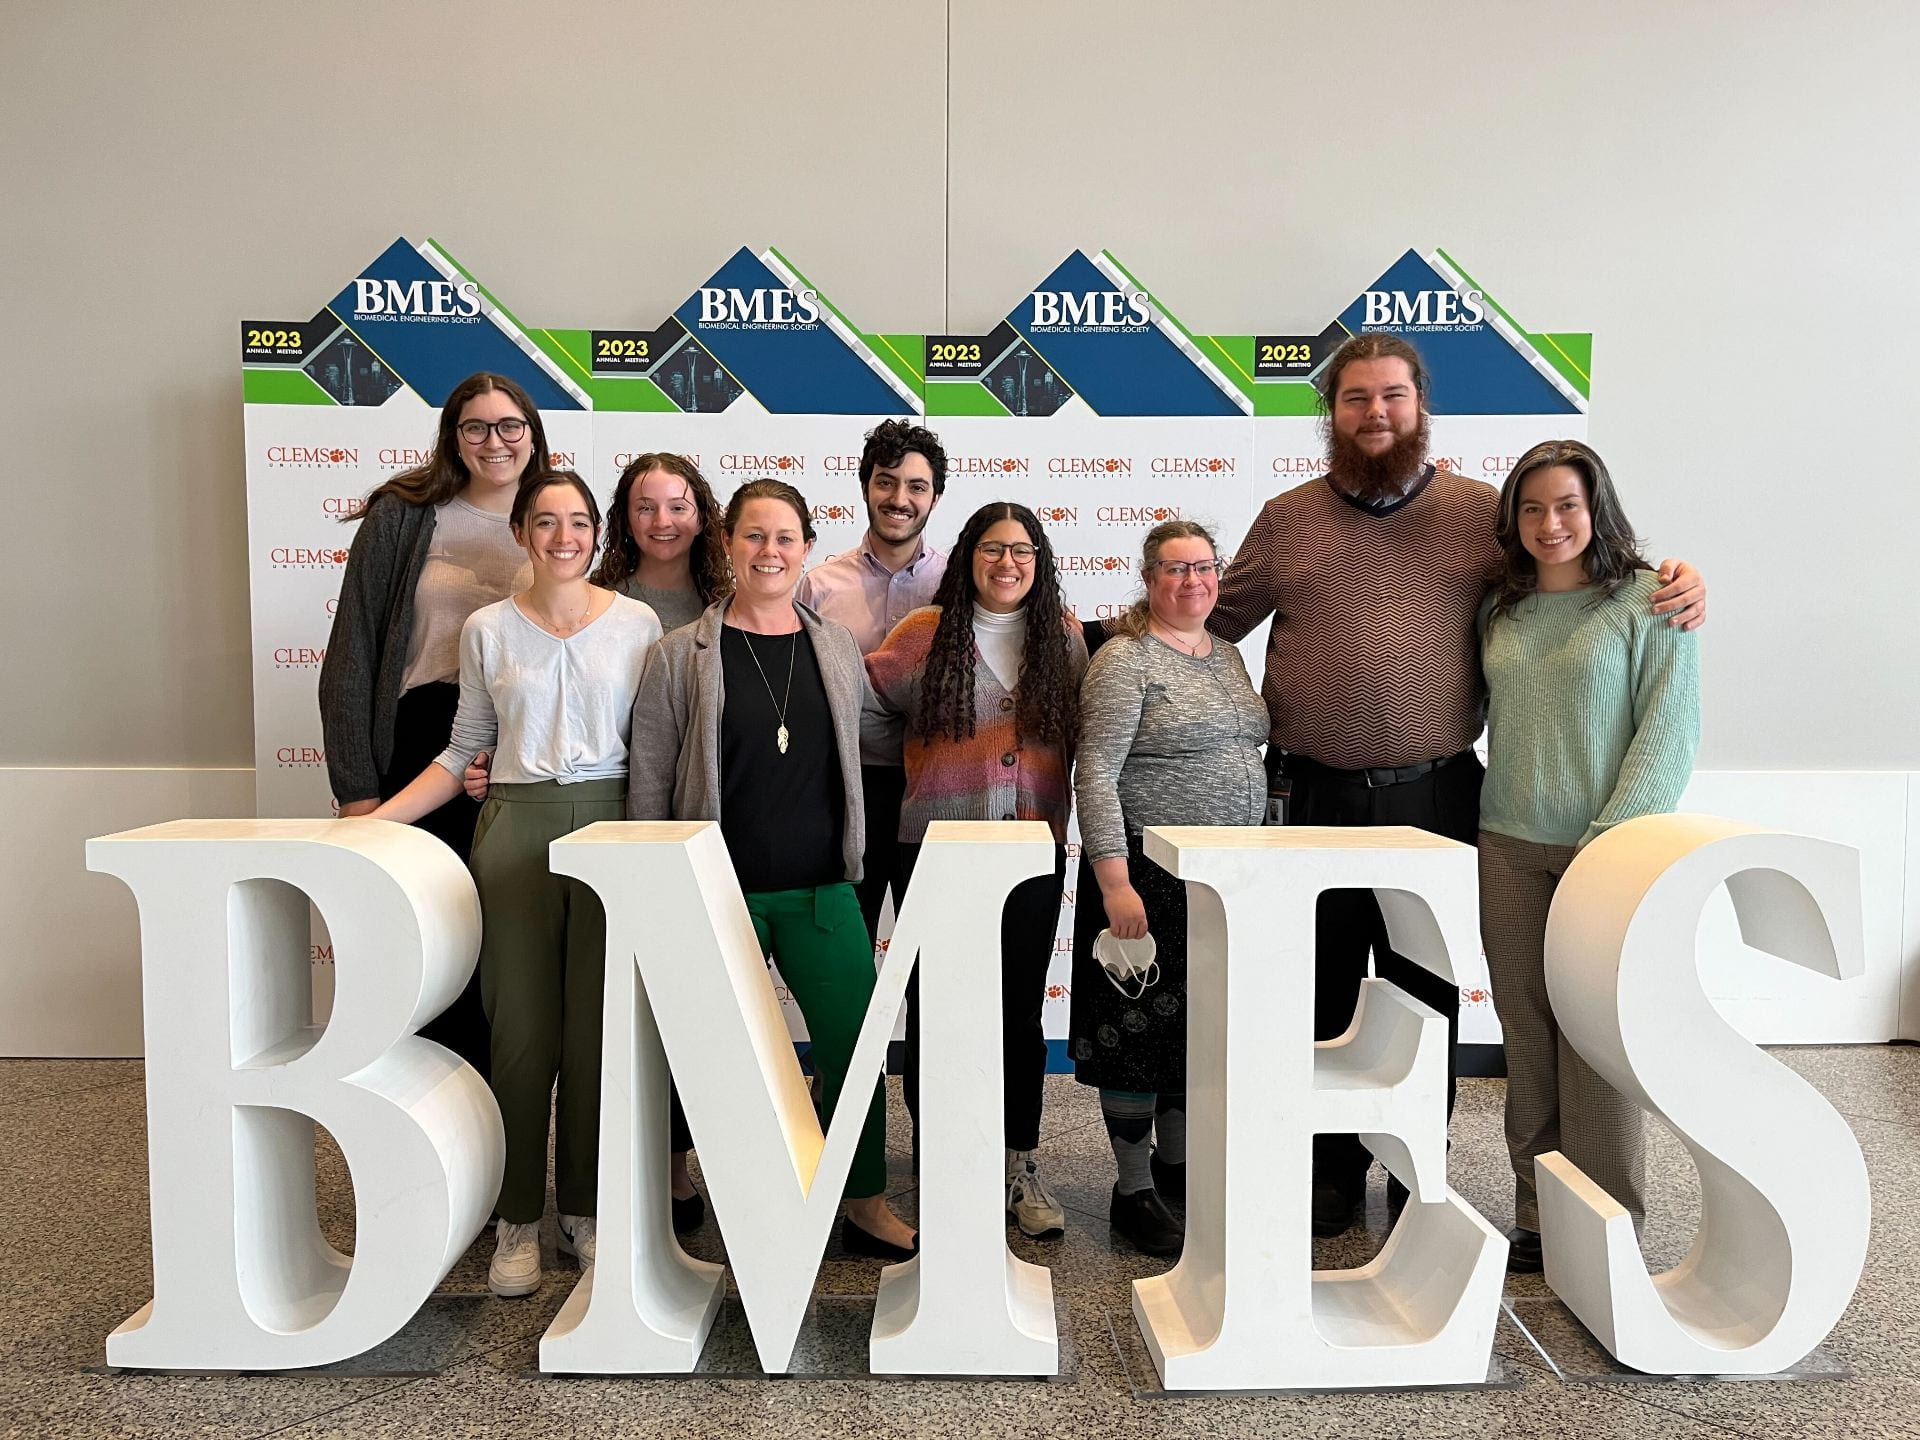 A group of people smiling behind large letters that spell out "BMES"